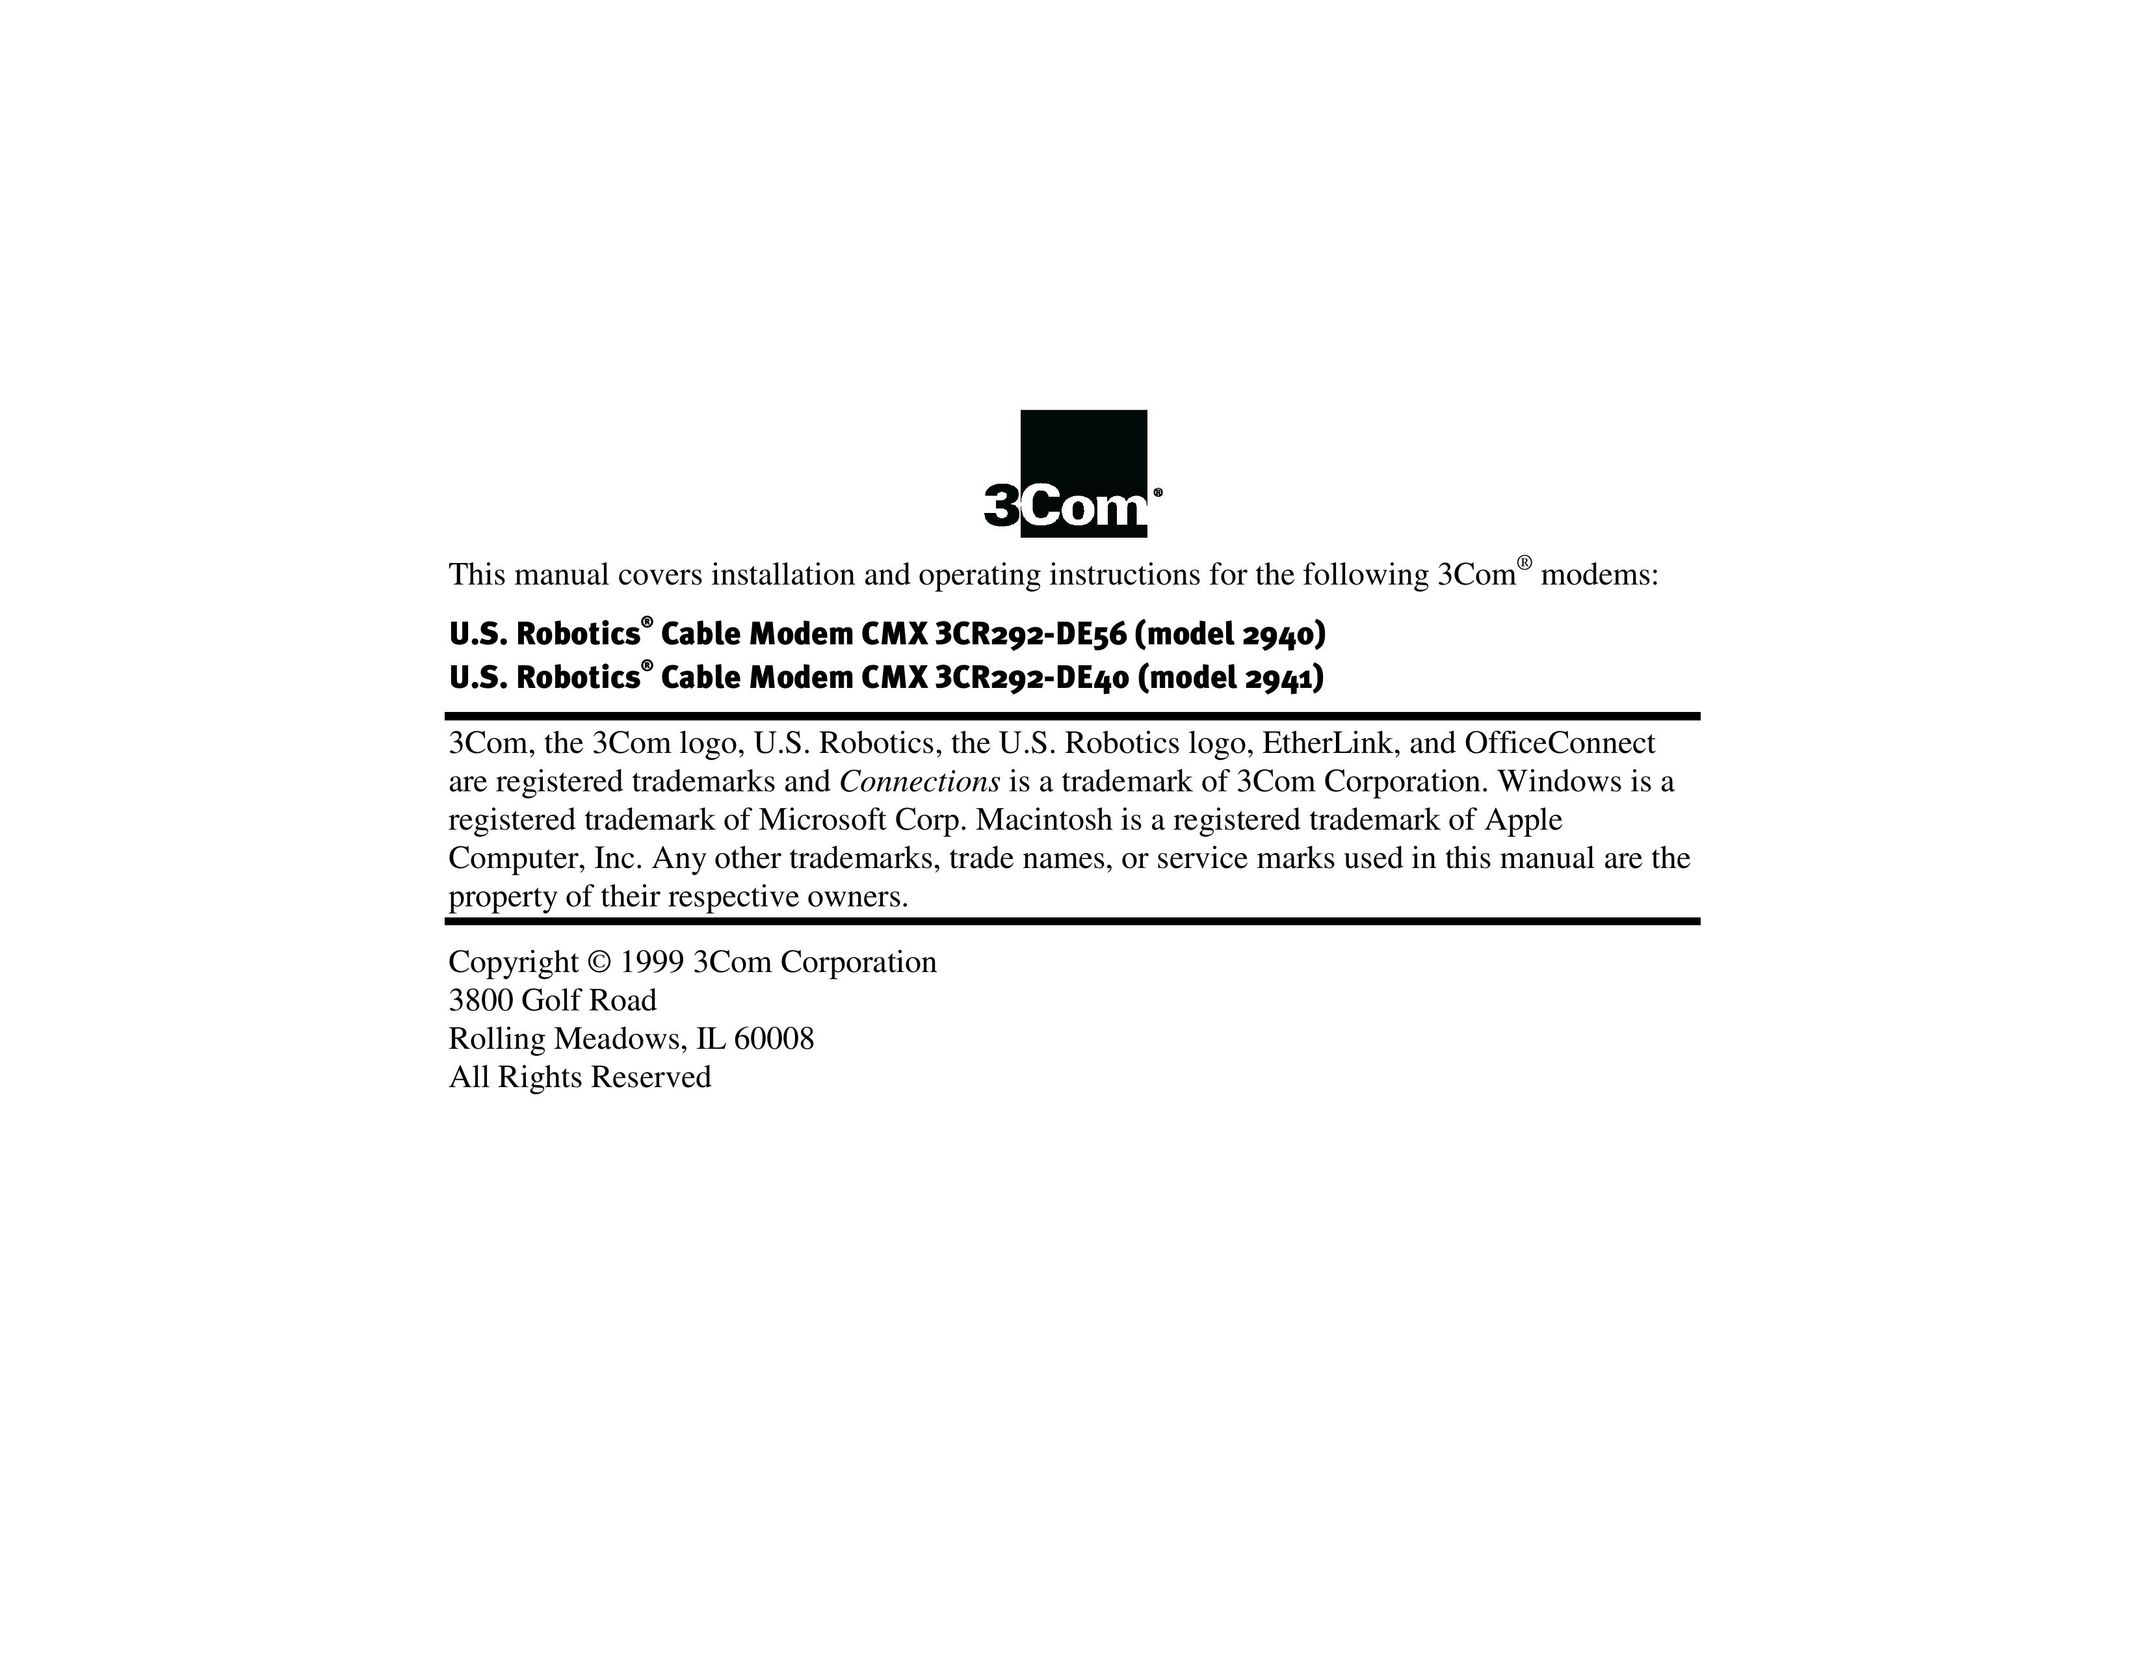 3Com 2940, 2941 Network Card User Manual (Page 1)